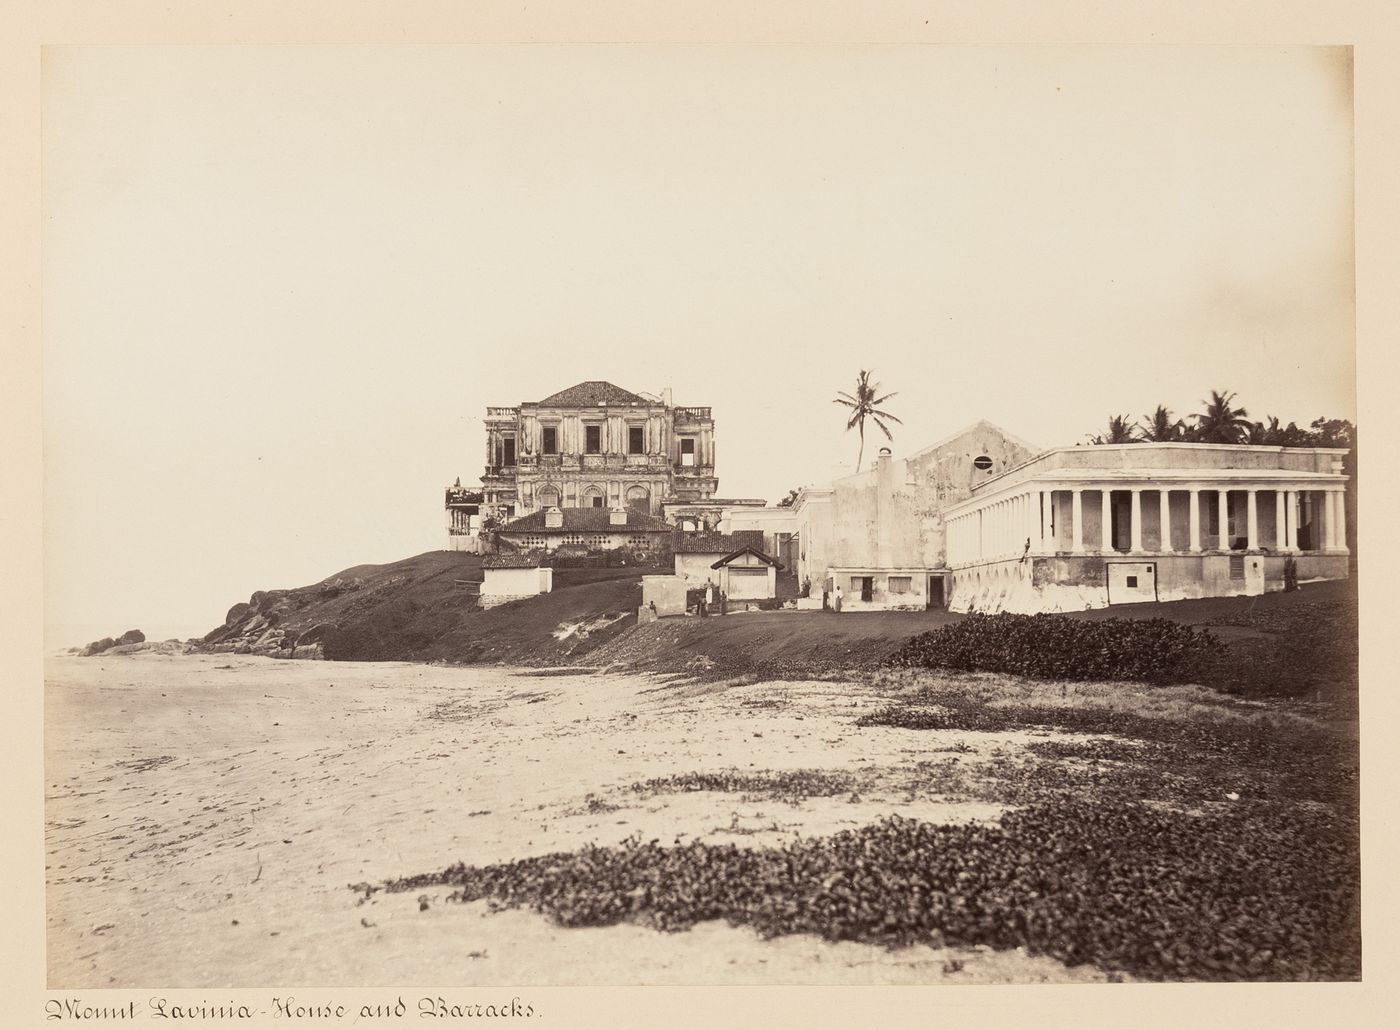 View of the Mount Lavinia (now Mount Lavinia Hotel) with other buildings on the right, Mount Lavinia, Ceylon (now Sri Lanka)